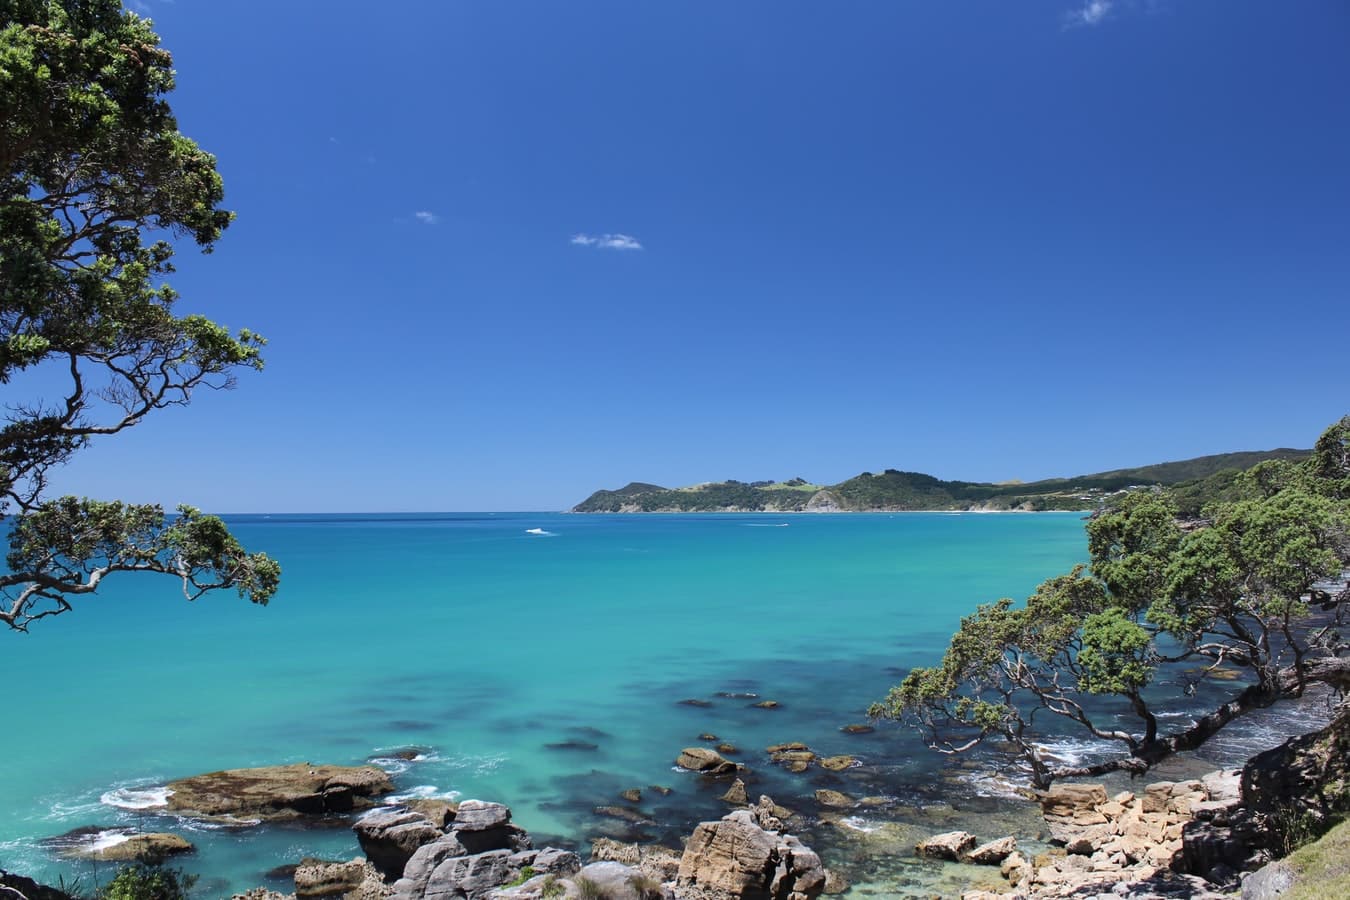 6 Northland Roadtrip Inspirational Itineraries To Try In New Zealand This Summer!